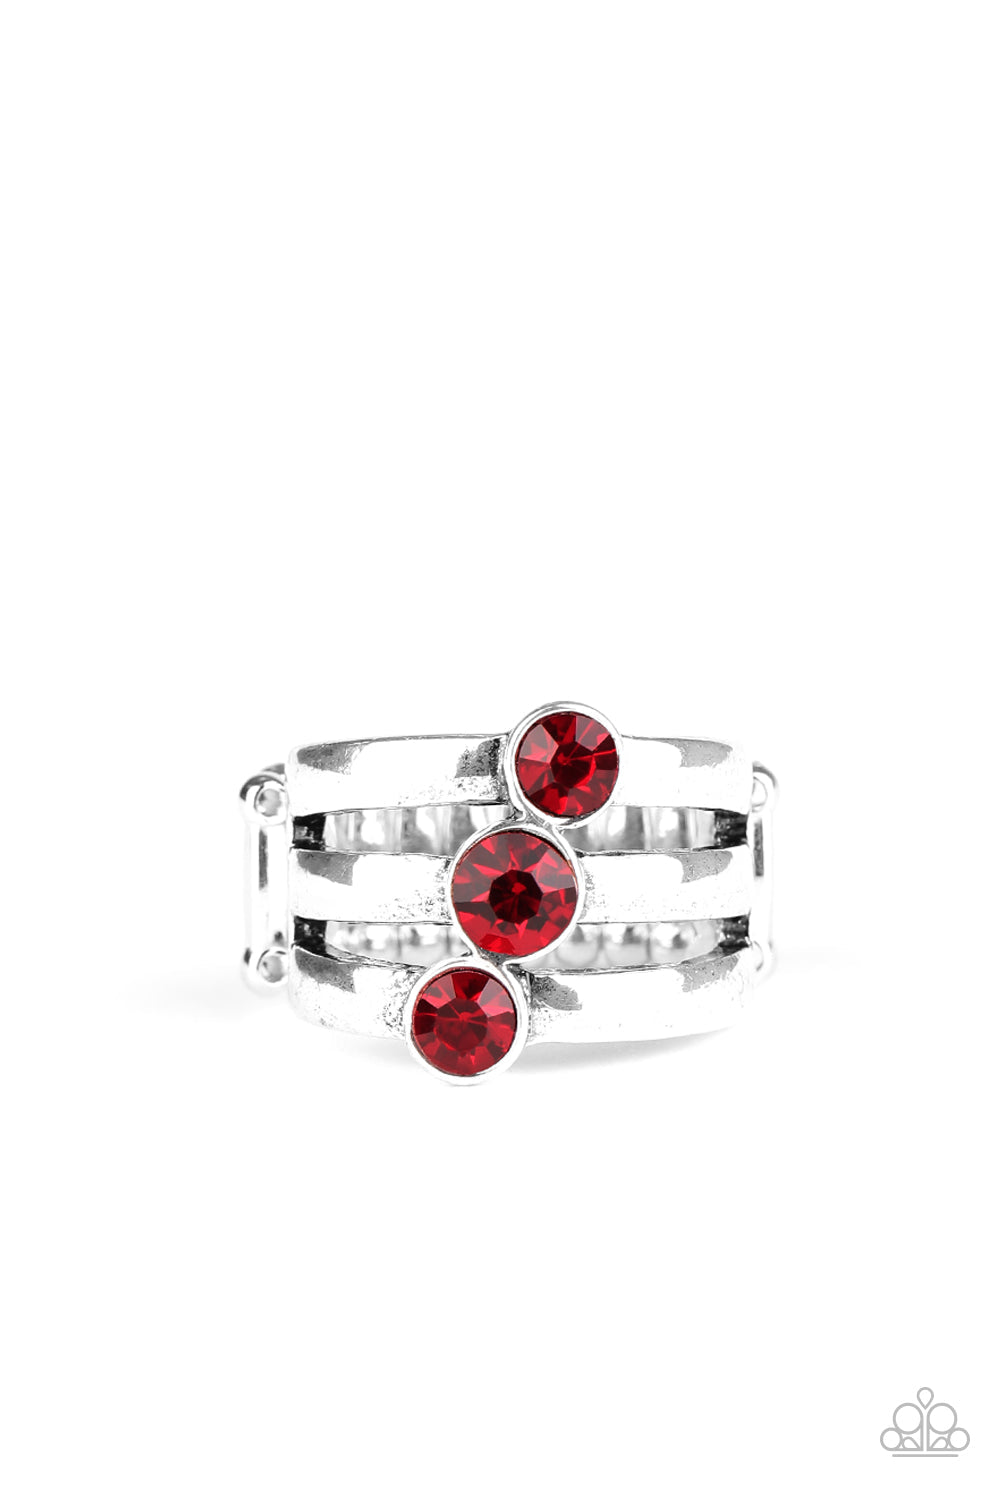 Triple The Twinkle - Red and Silver Ring - Paparazzi Jewelry - Bejeweled Accessories By Kristie - Red rhinestones slant across three stacked silver bands, coalescing into a refined fashion ring. Features a stretchy band for an adjustable flexible fit.